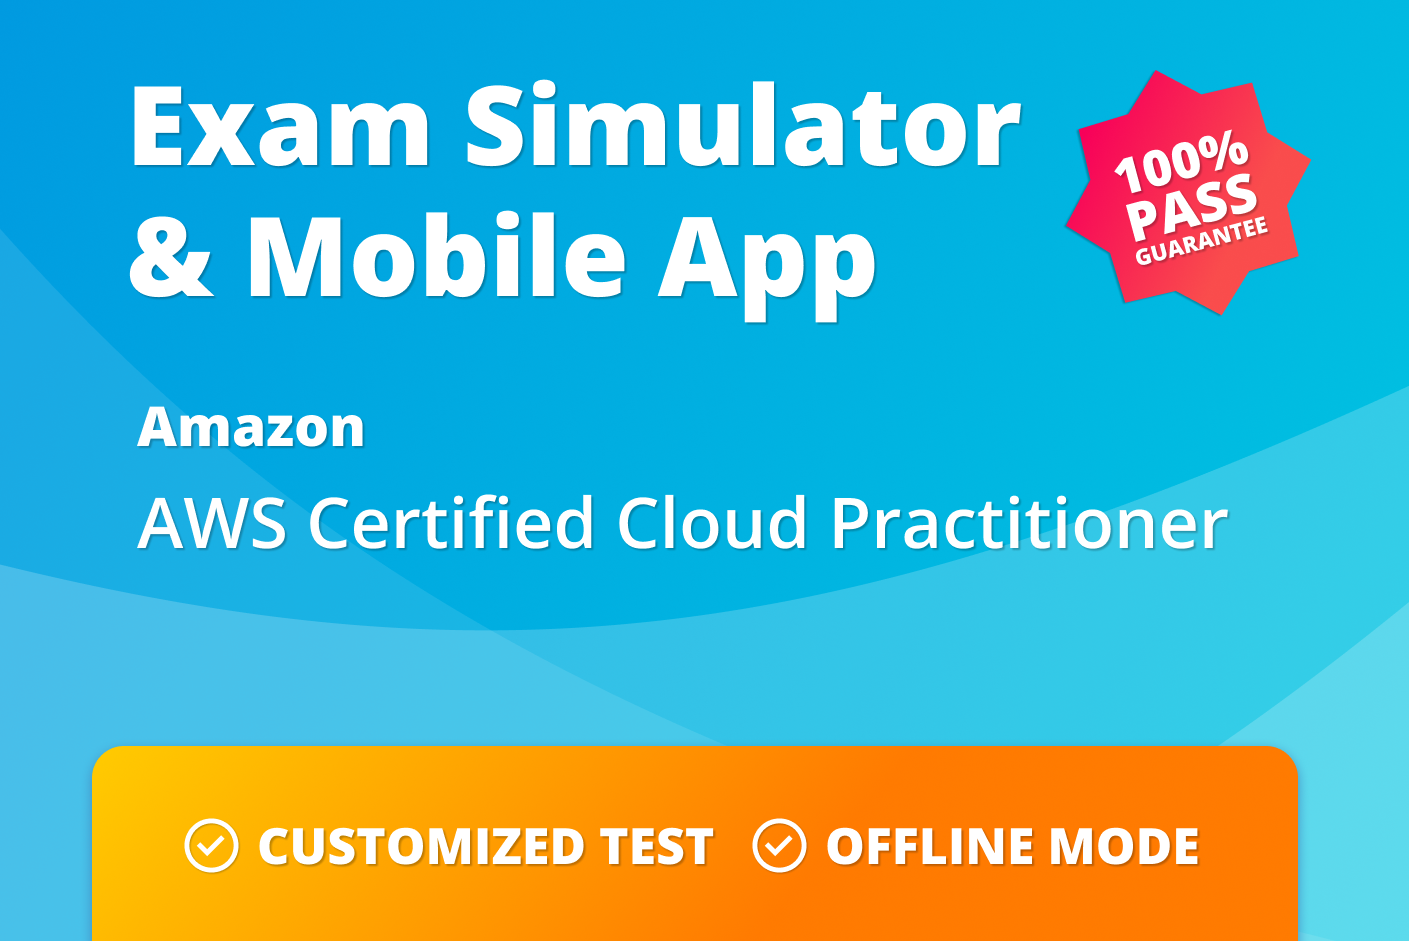 Prepare for the AWS Certified Cloud Practitioner exam with our AWS Certified Cloud Practitioner practice test